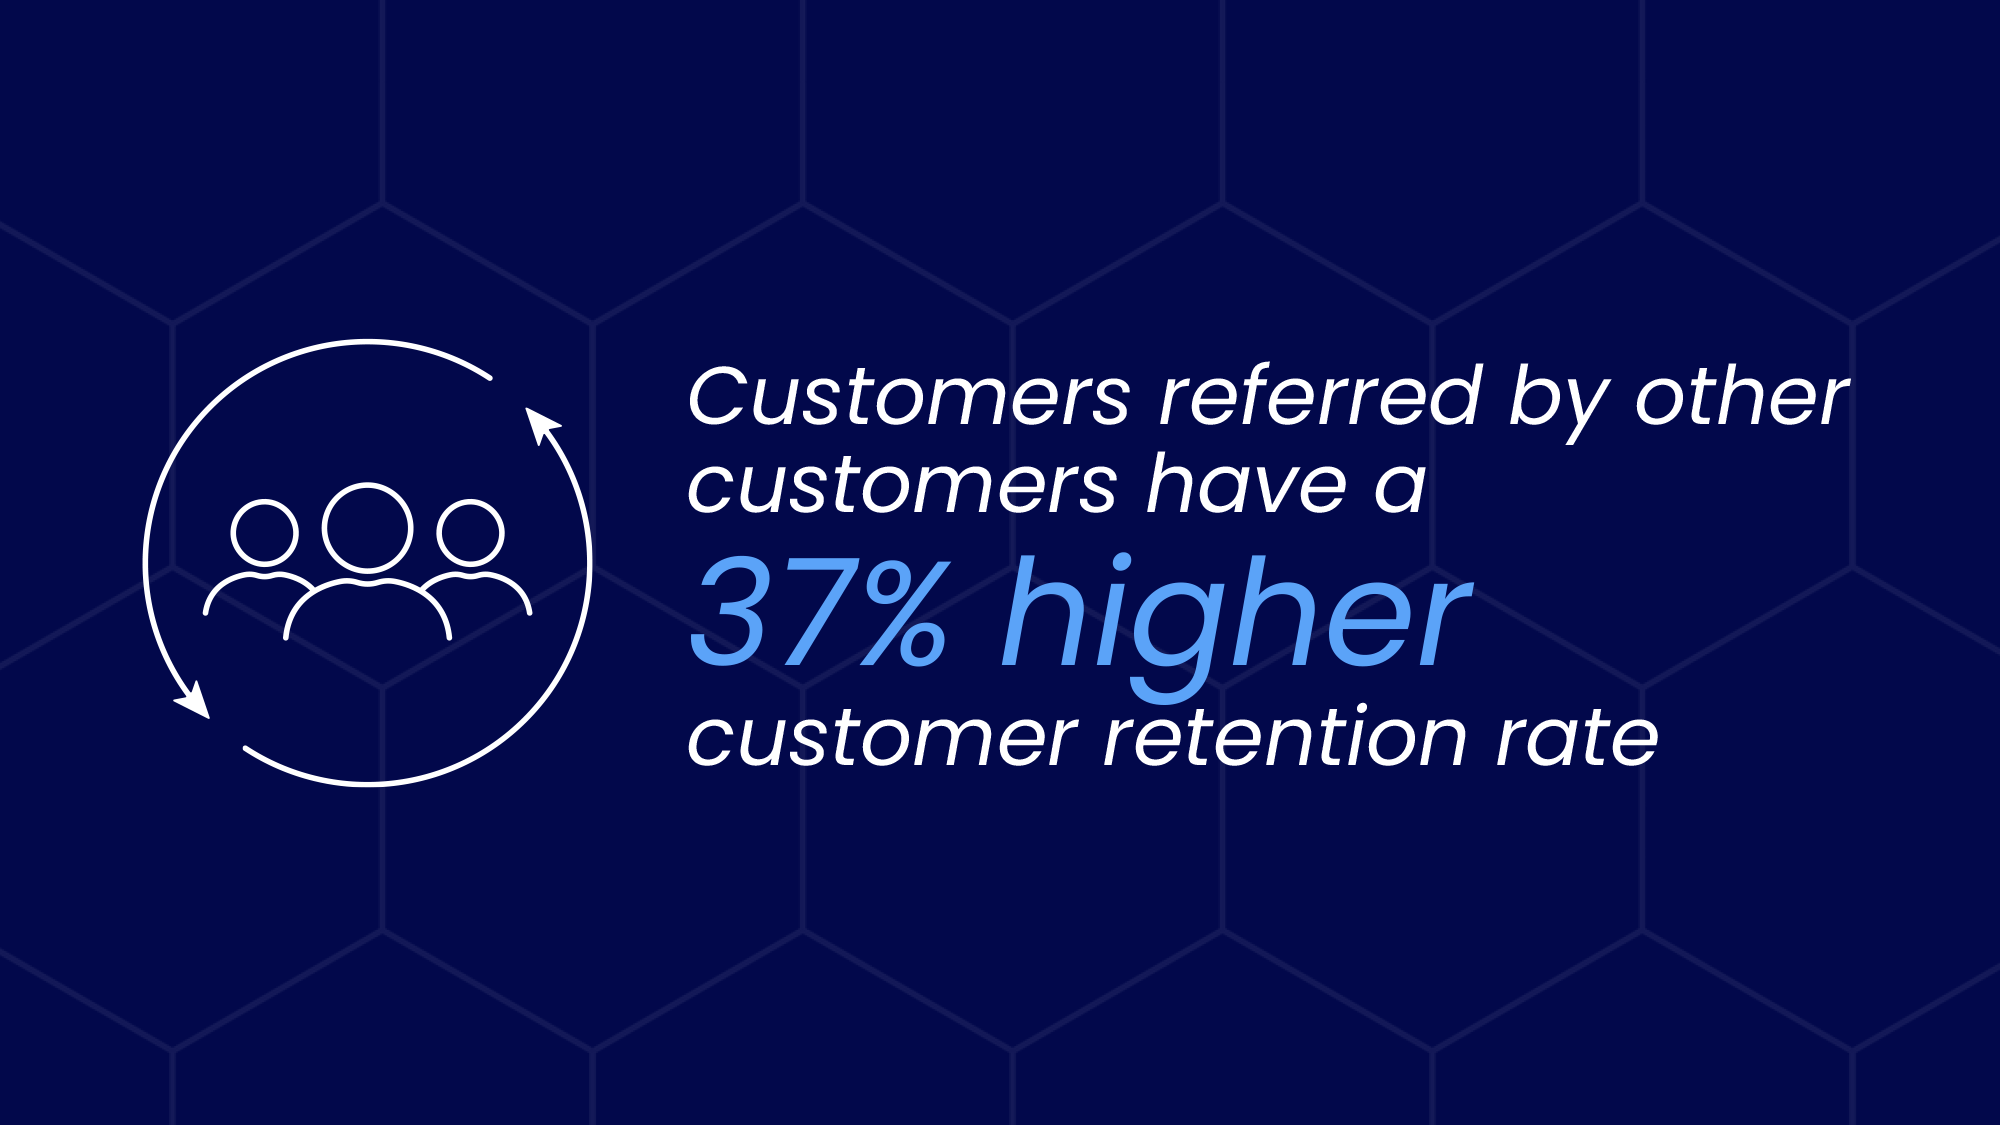 customers referred by other customers have a 37% higher customer retention rate